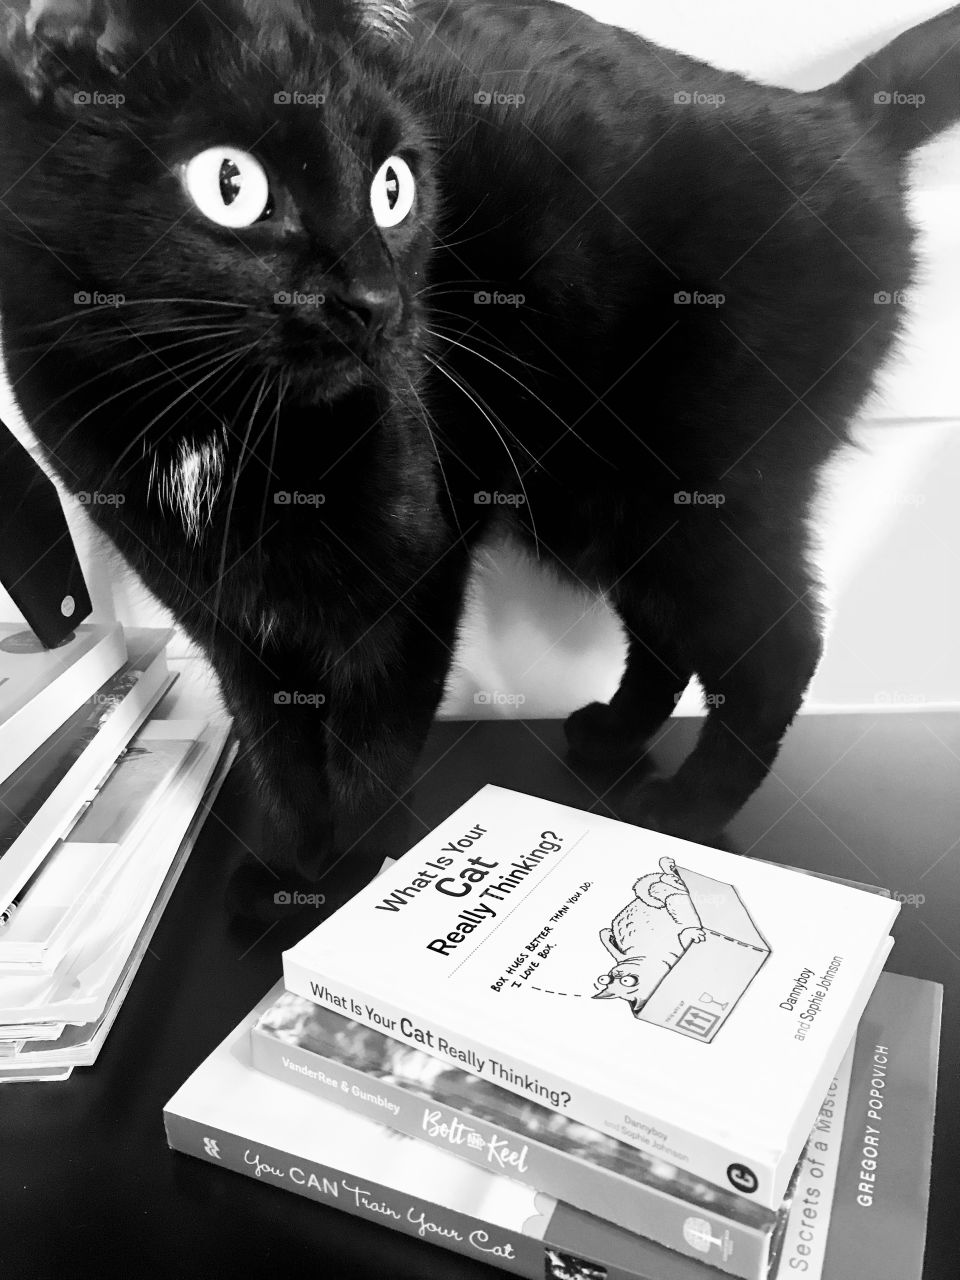 Darling black kitty cat standing next to book that says, “ What is your cat really thinking?”  